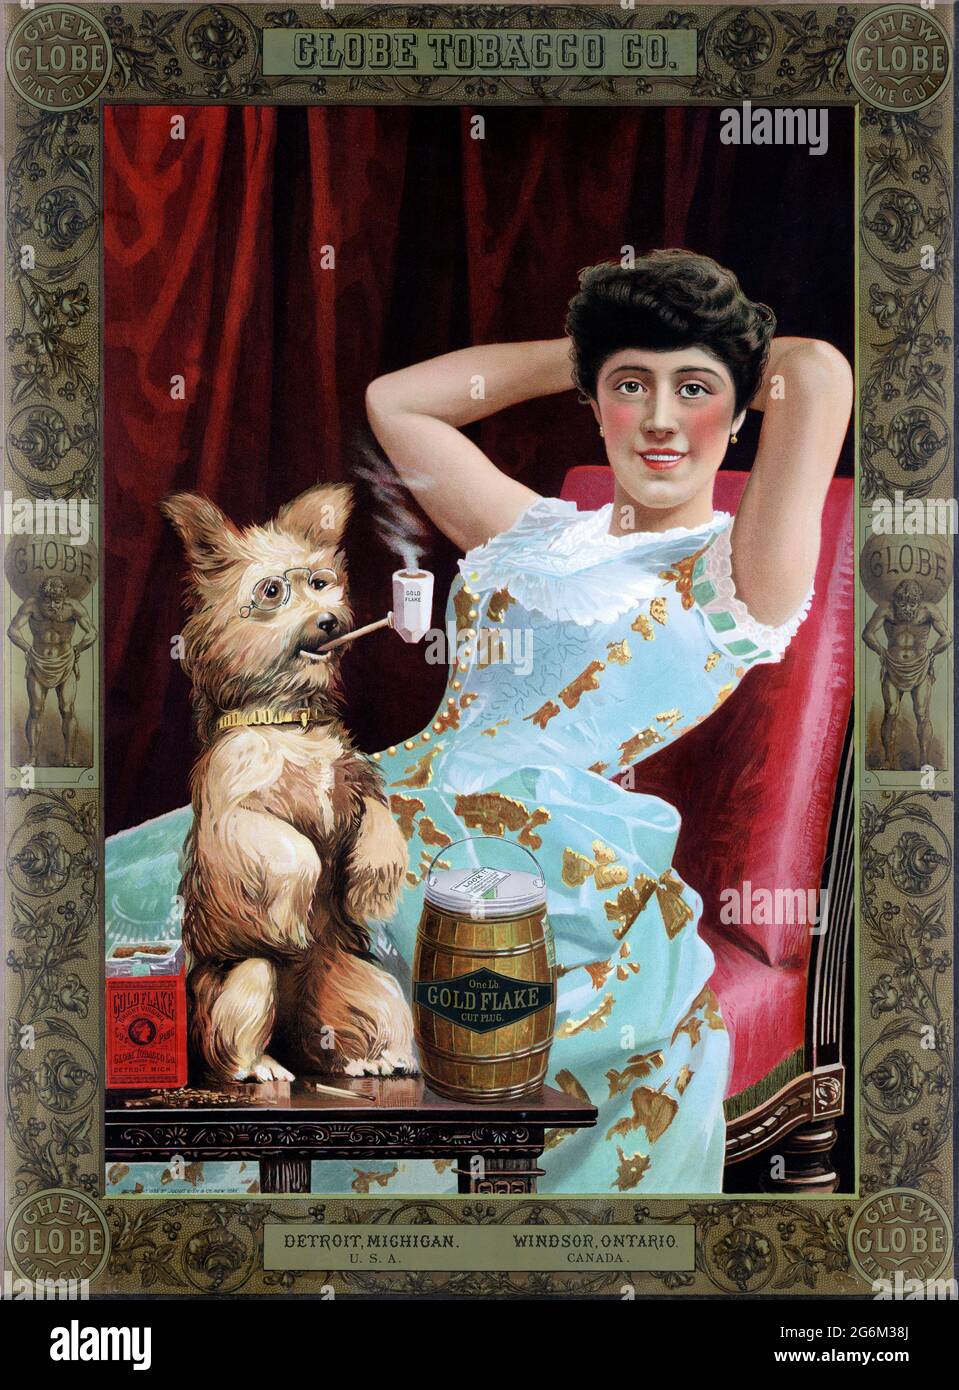 Globe Tobacco Co. Chew Globe Fine Cut. Artist unknown. Restored vintage poster published in 1885 in the USA. Stock Photo